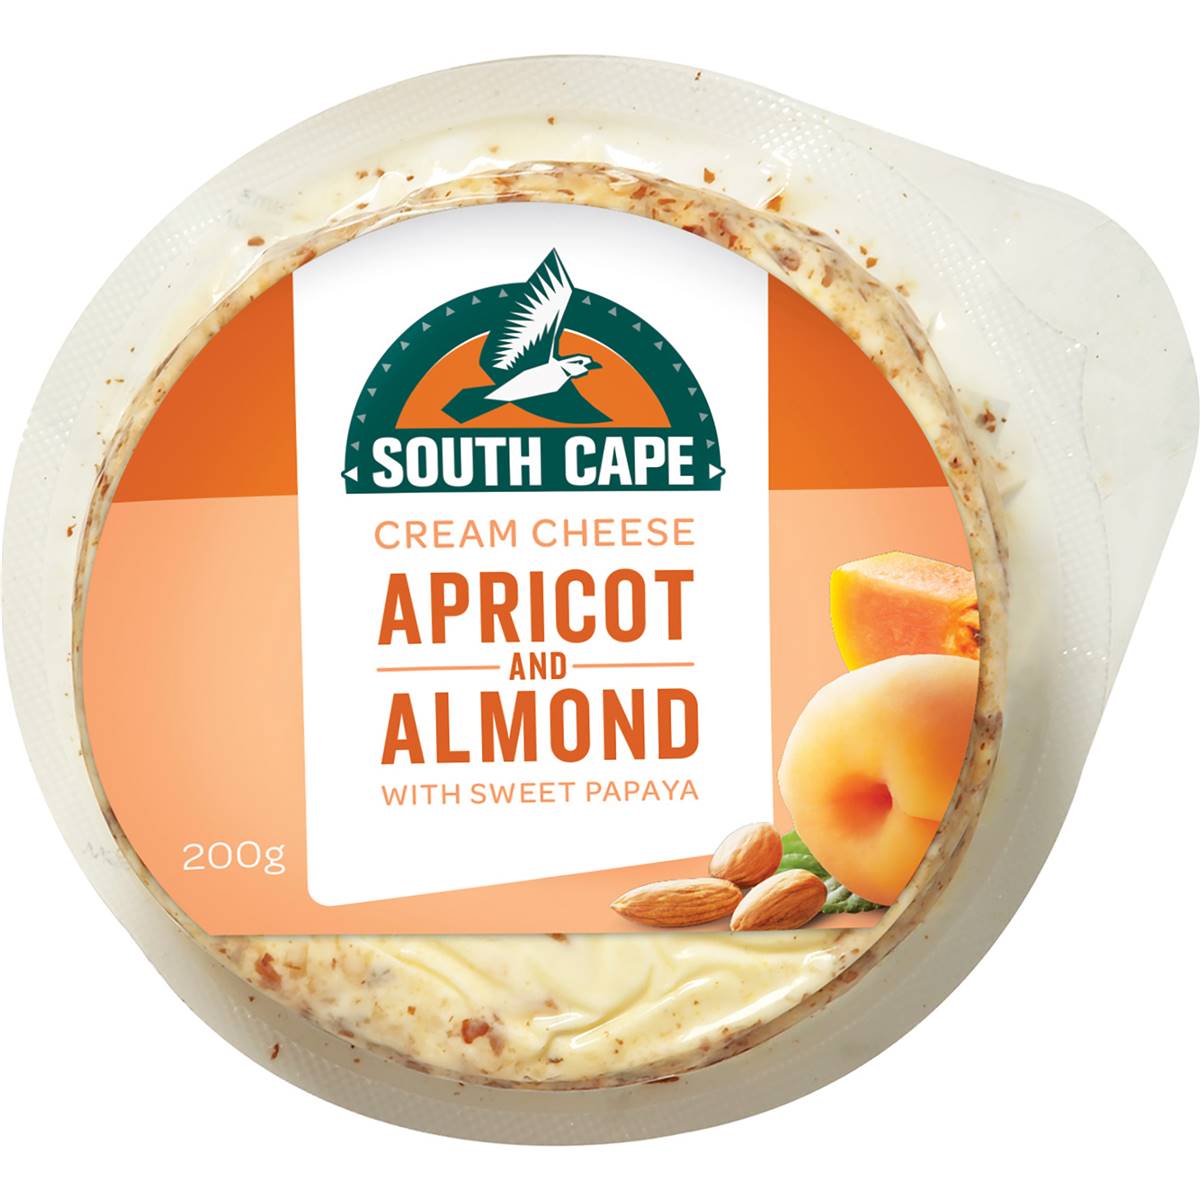 Calories in South Cape Apricot & Almond Cream Cheese